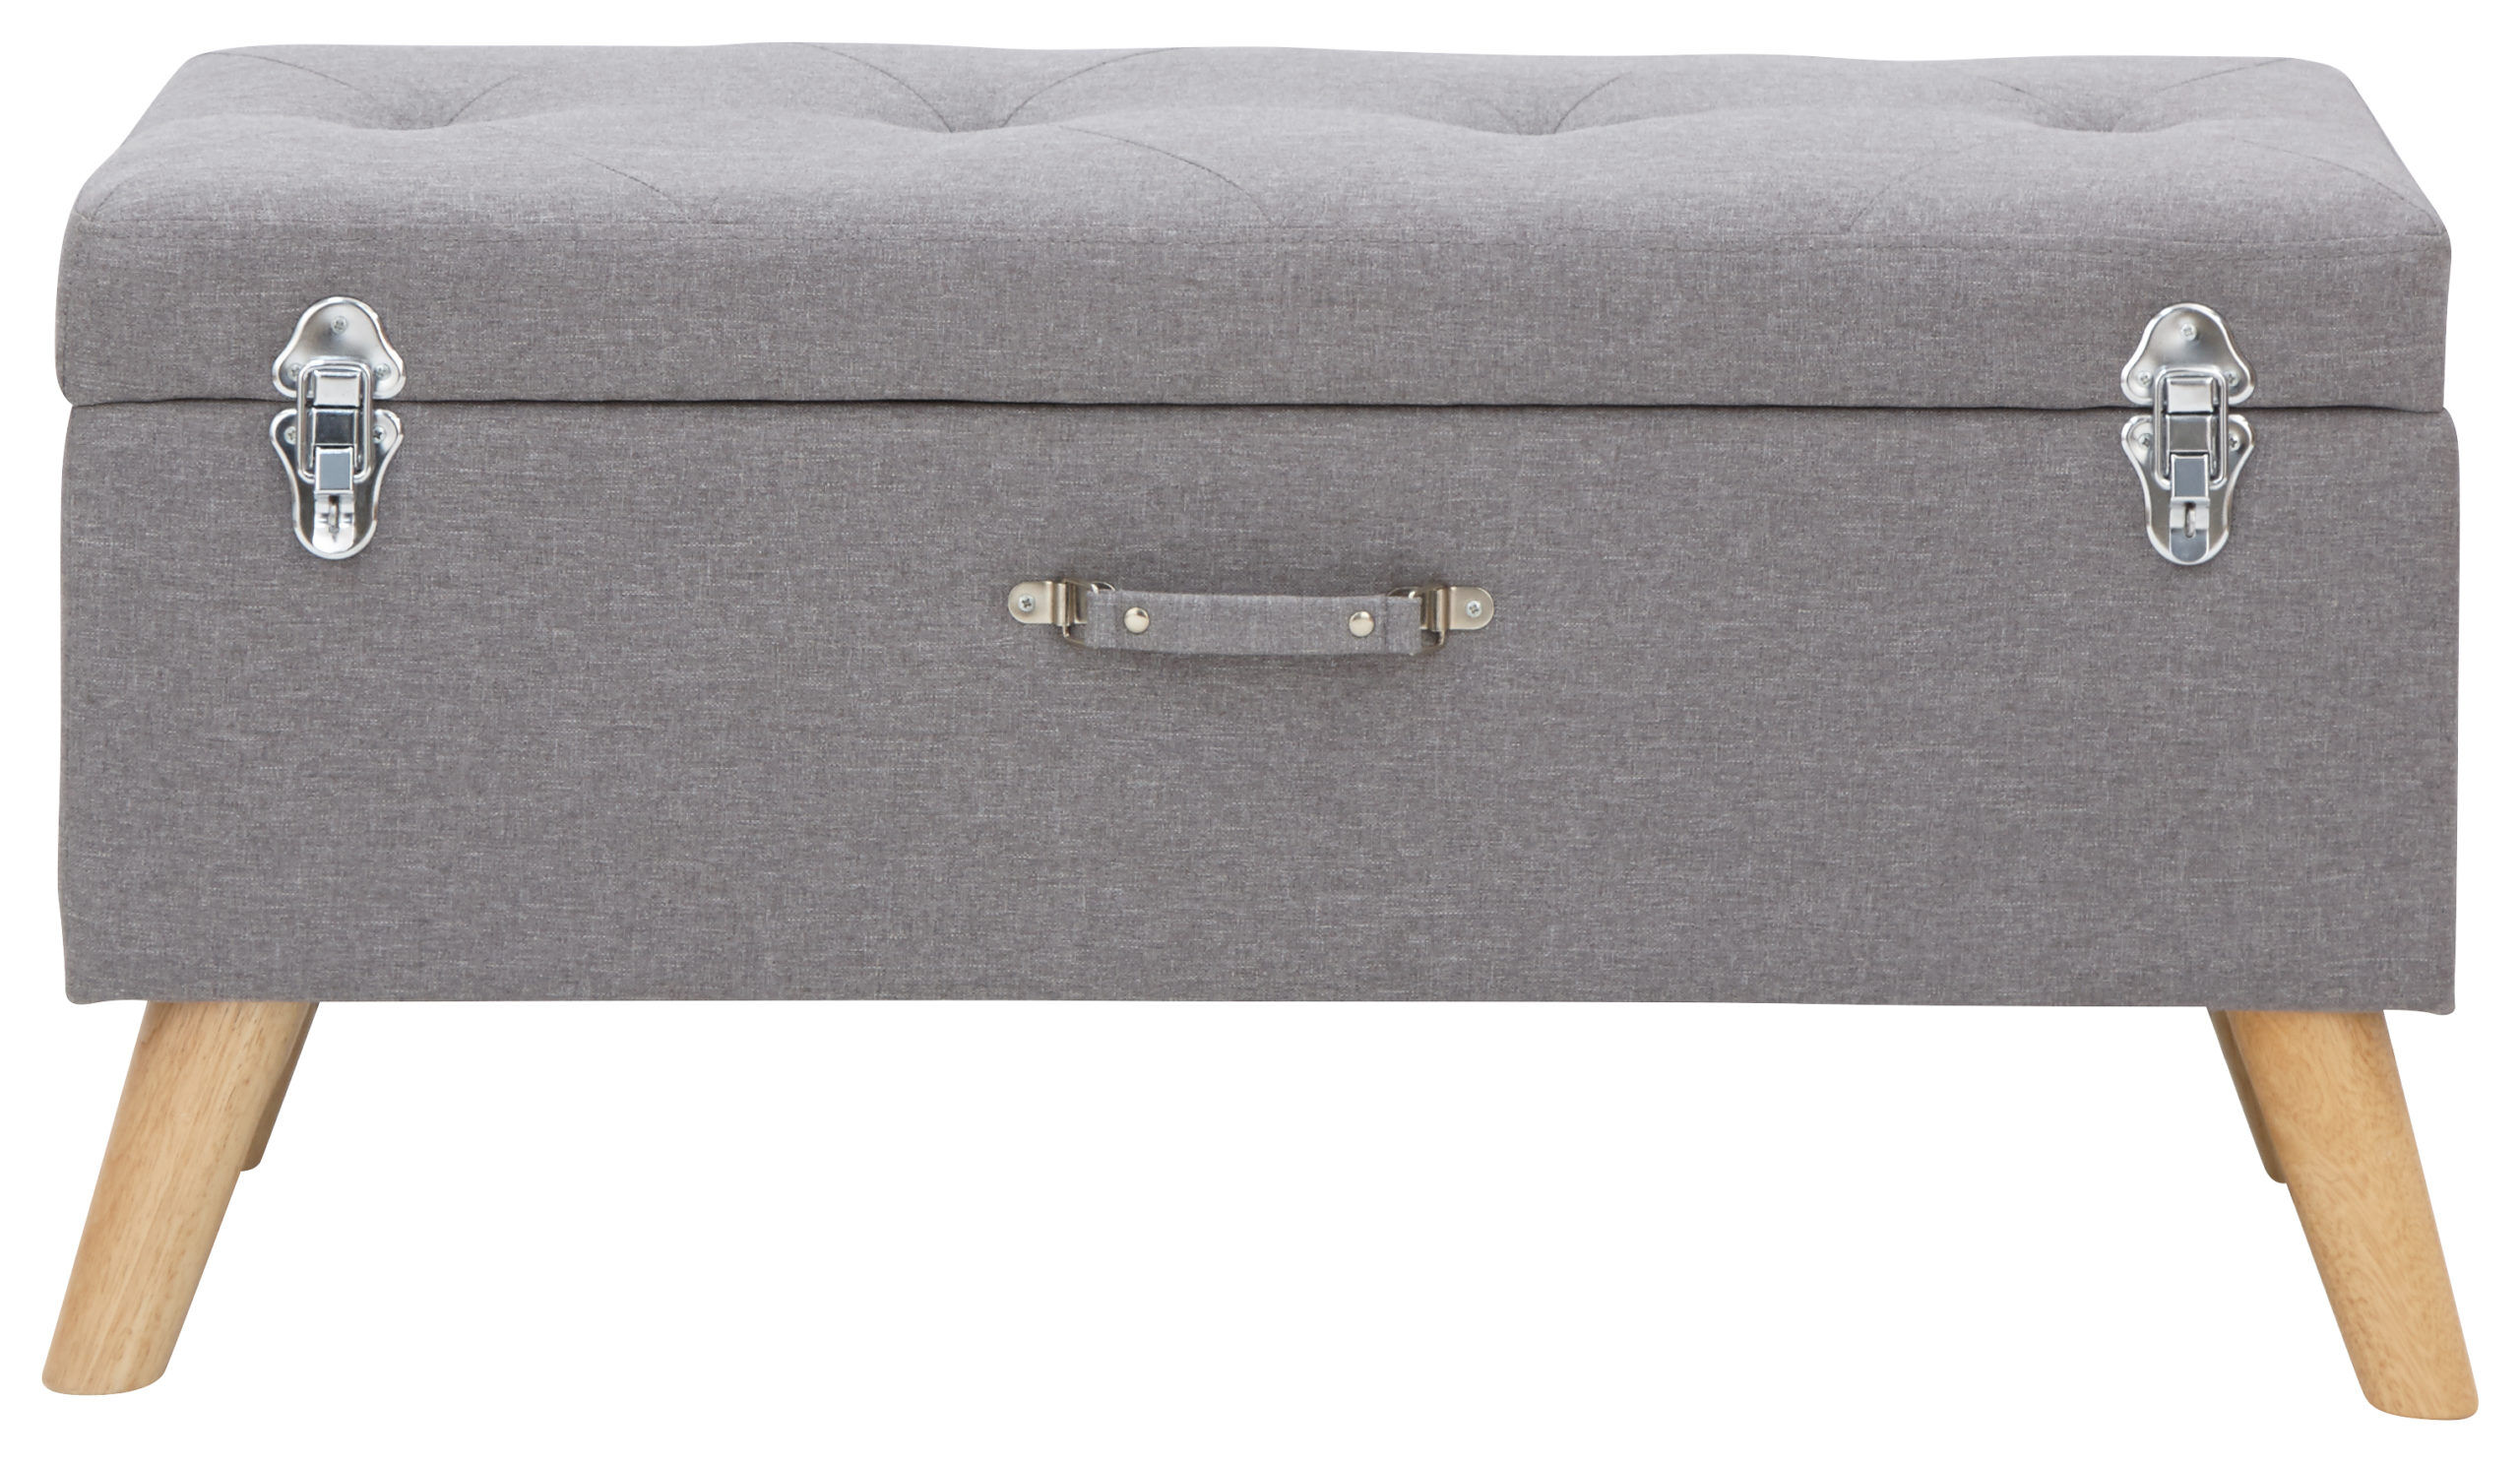 Deluxe Storage & Seating Storage Ottoman   Large   Grey   Self Assembly